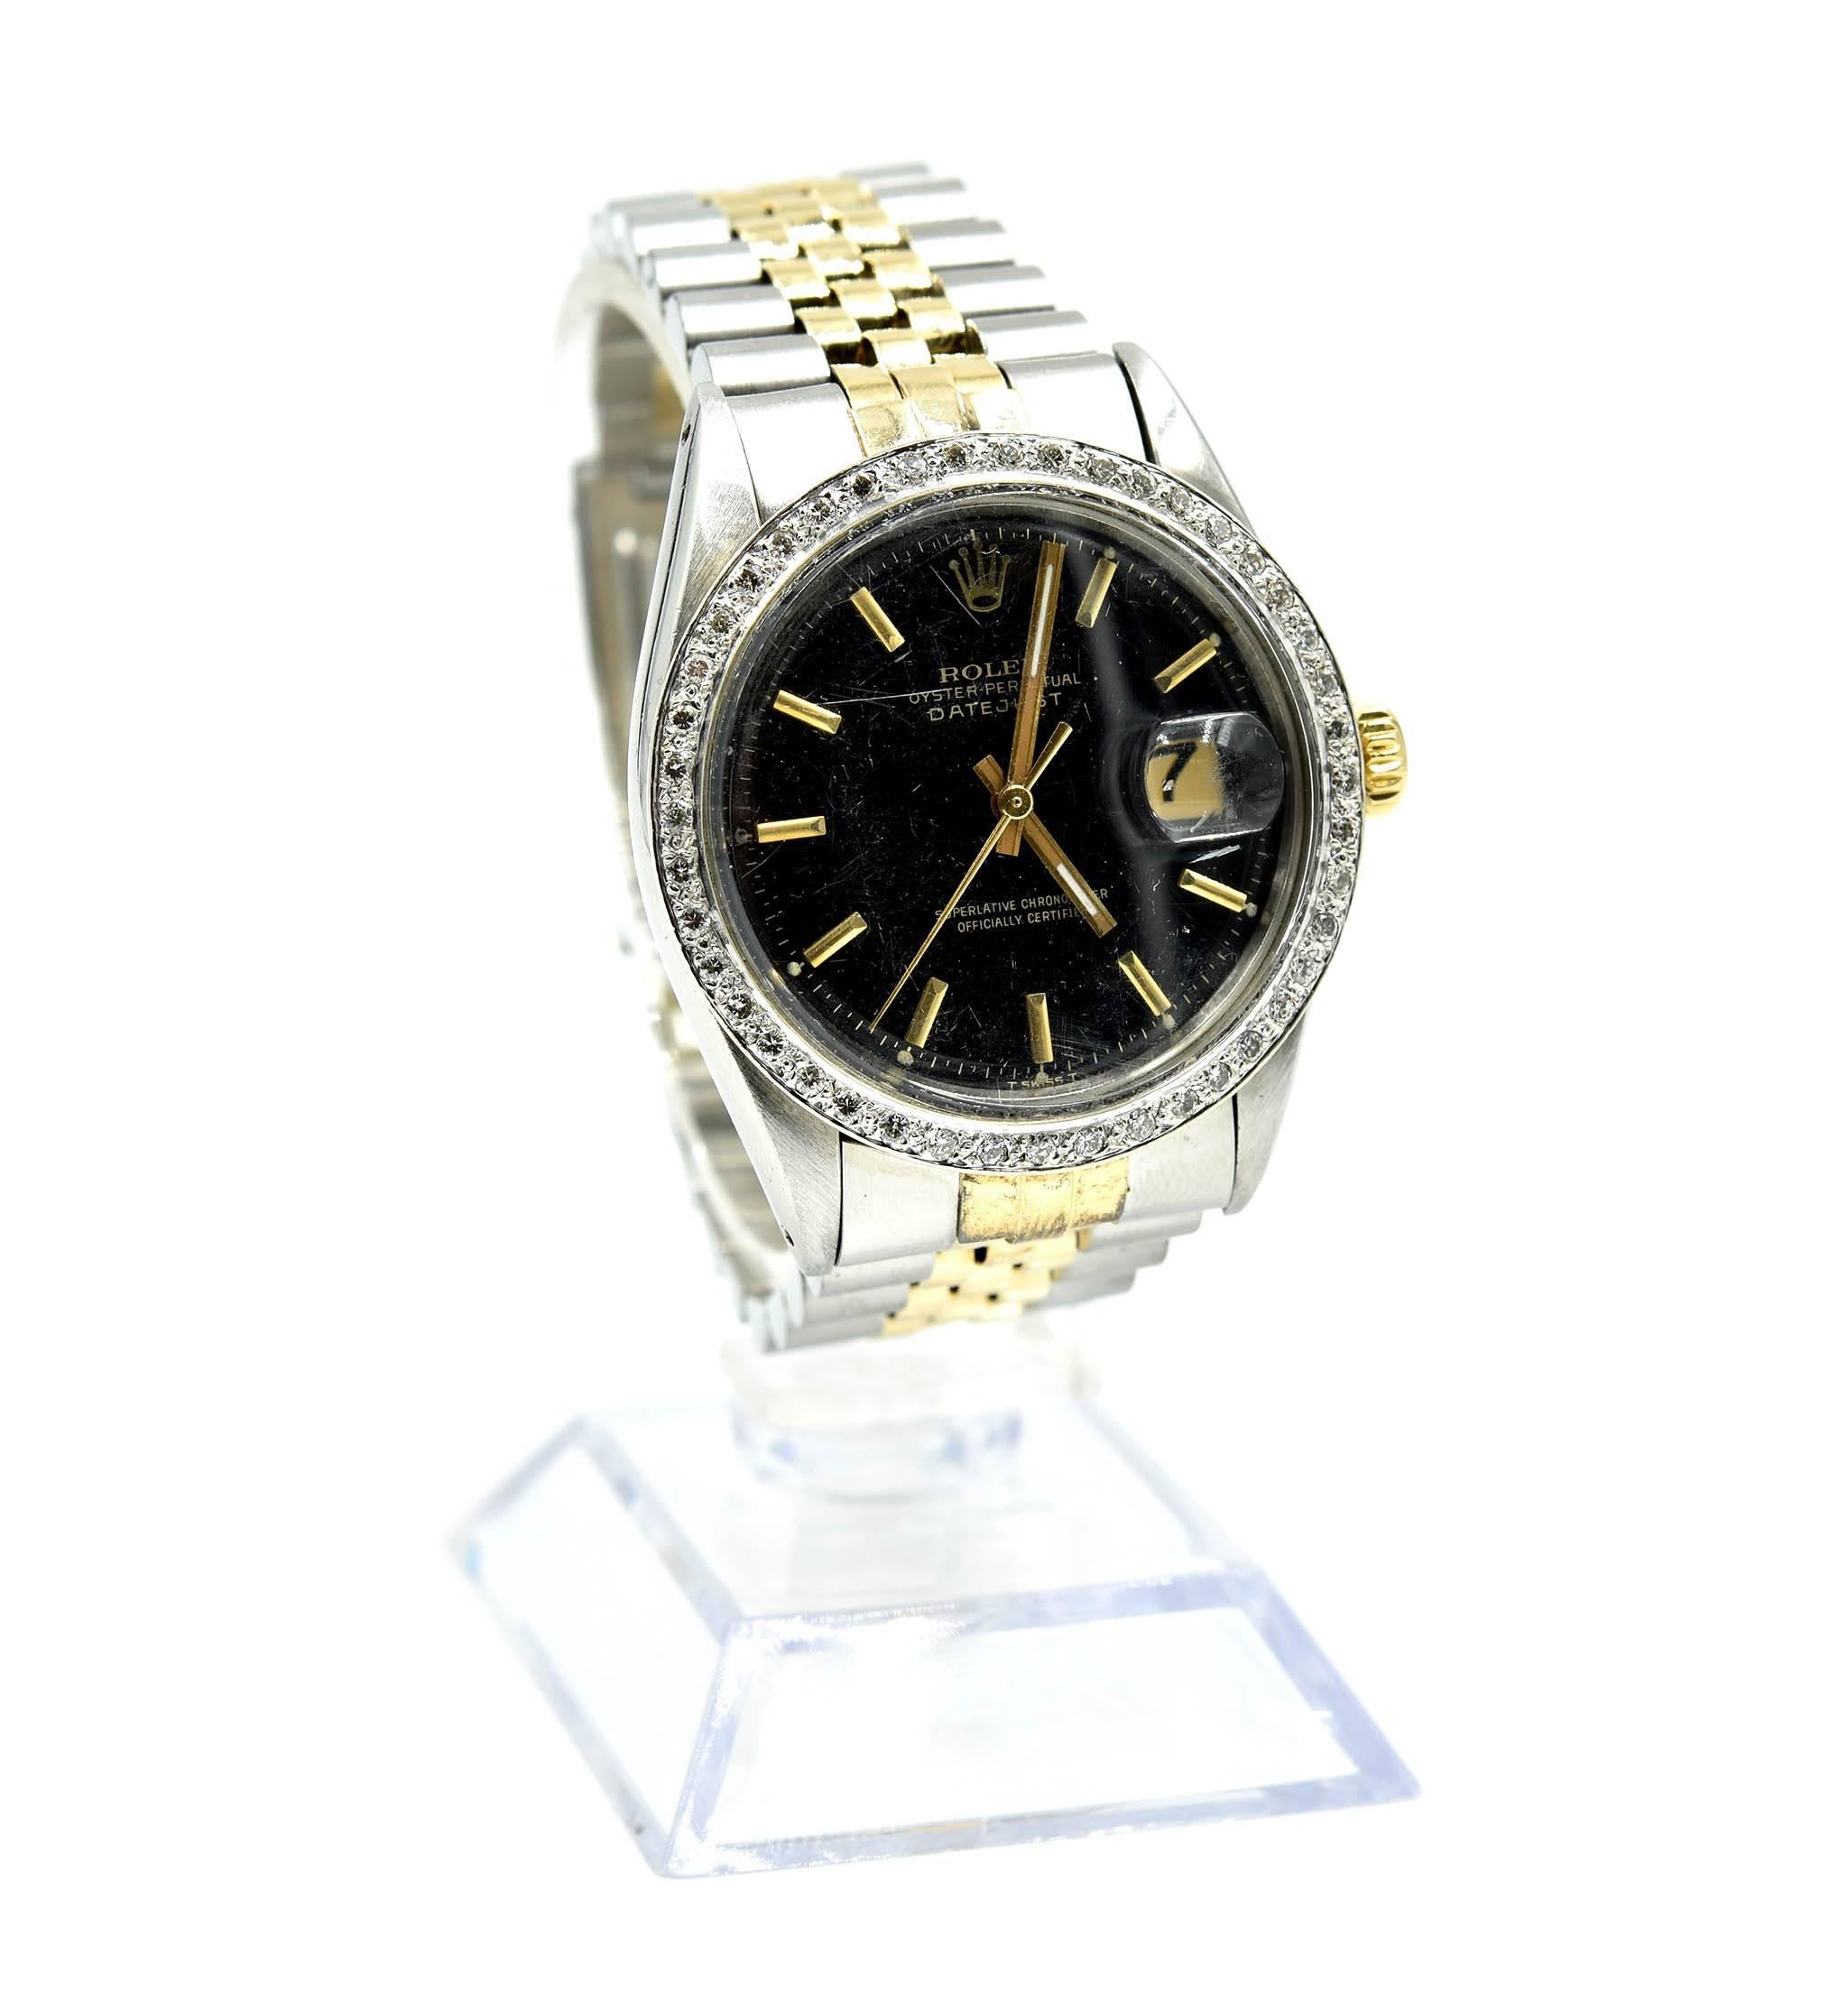 Movement: automatic
Function: hours, minutes, seconds, date
Case: round 36mm stainless steel case with custom diamond bezel, plastic crystal, 18k yellow gold screw-down crown, waterproof to 100 meters
Band: custom stainless steel and 18k yellow gold